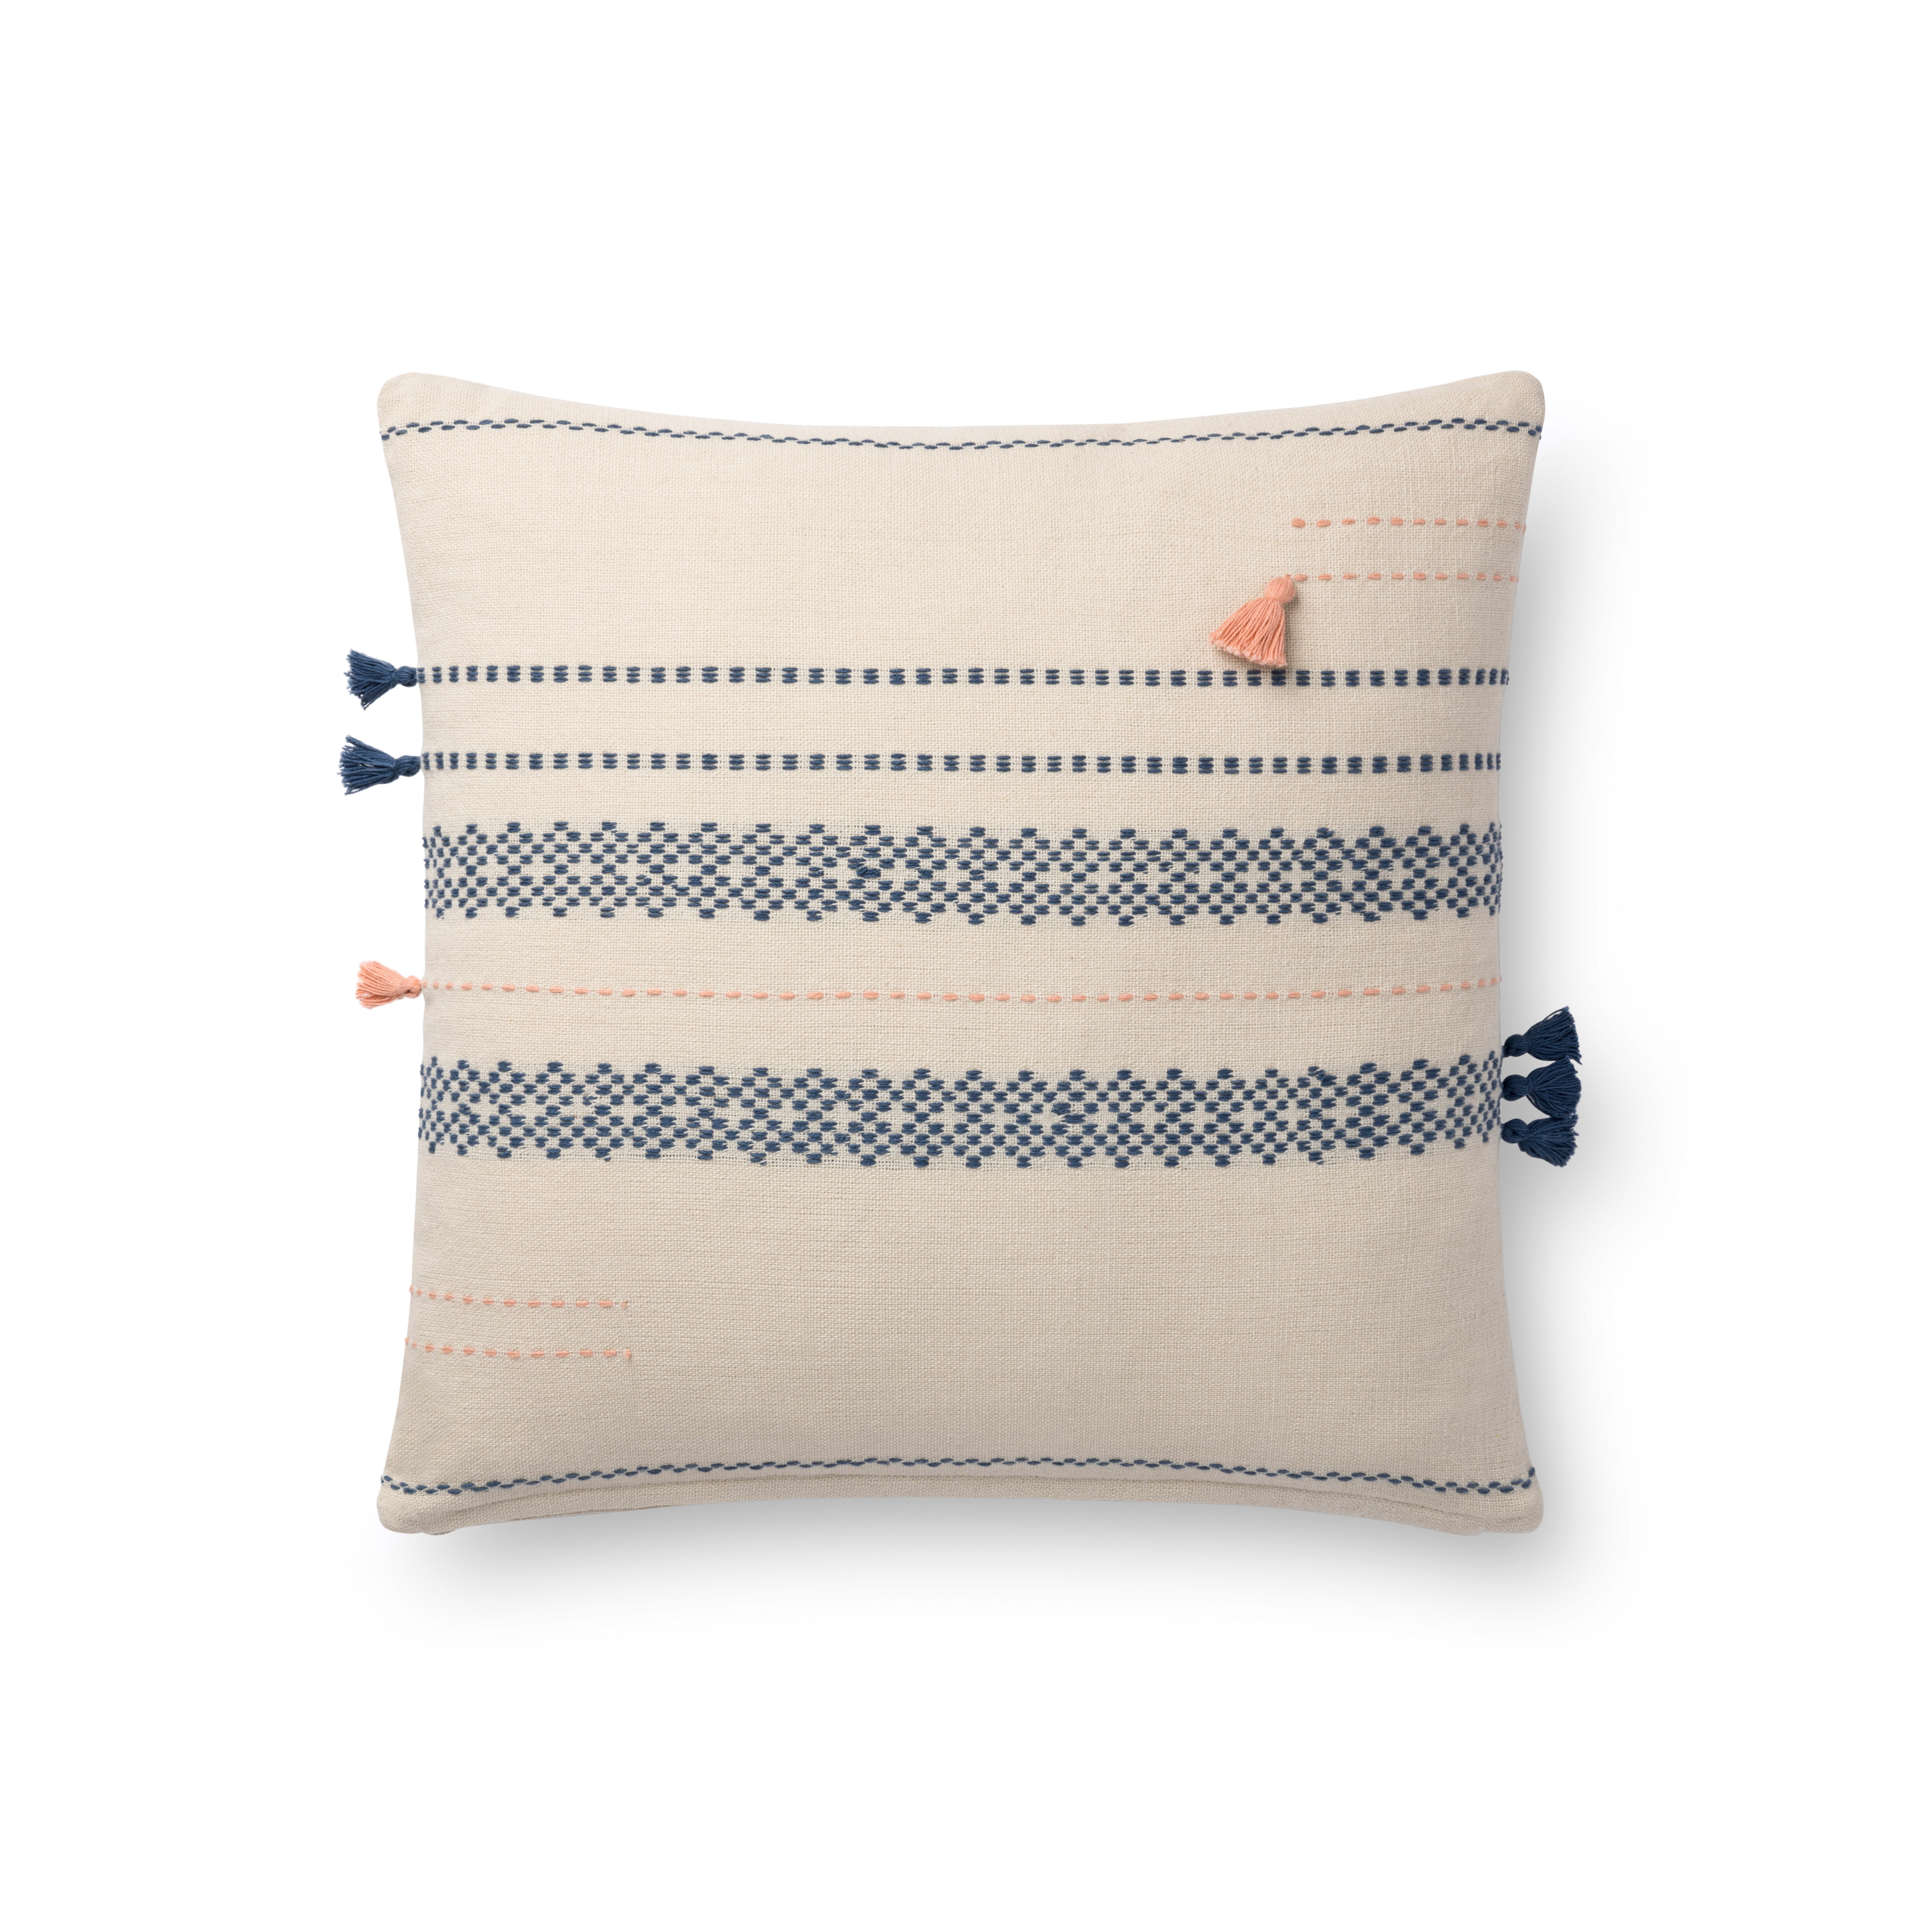 PILLOWS P1113 MULTI / BLUE 18" x 18" Cover w/Poly - Magnolia Home by Joana Gaines Crafted by Loloi Rugs